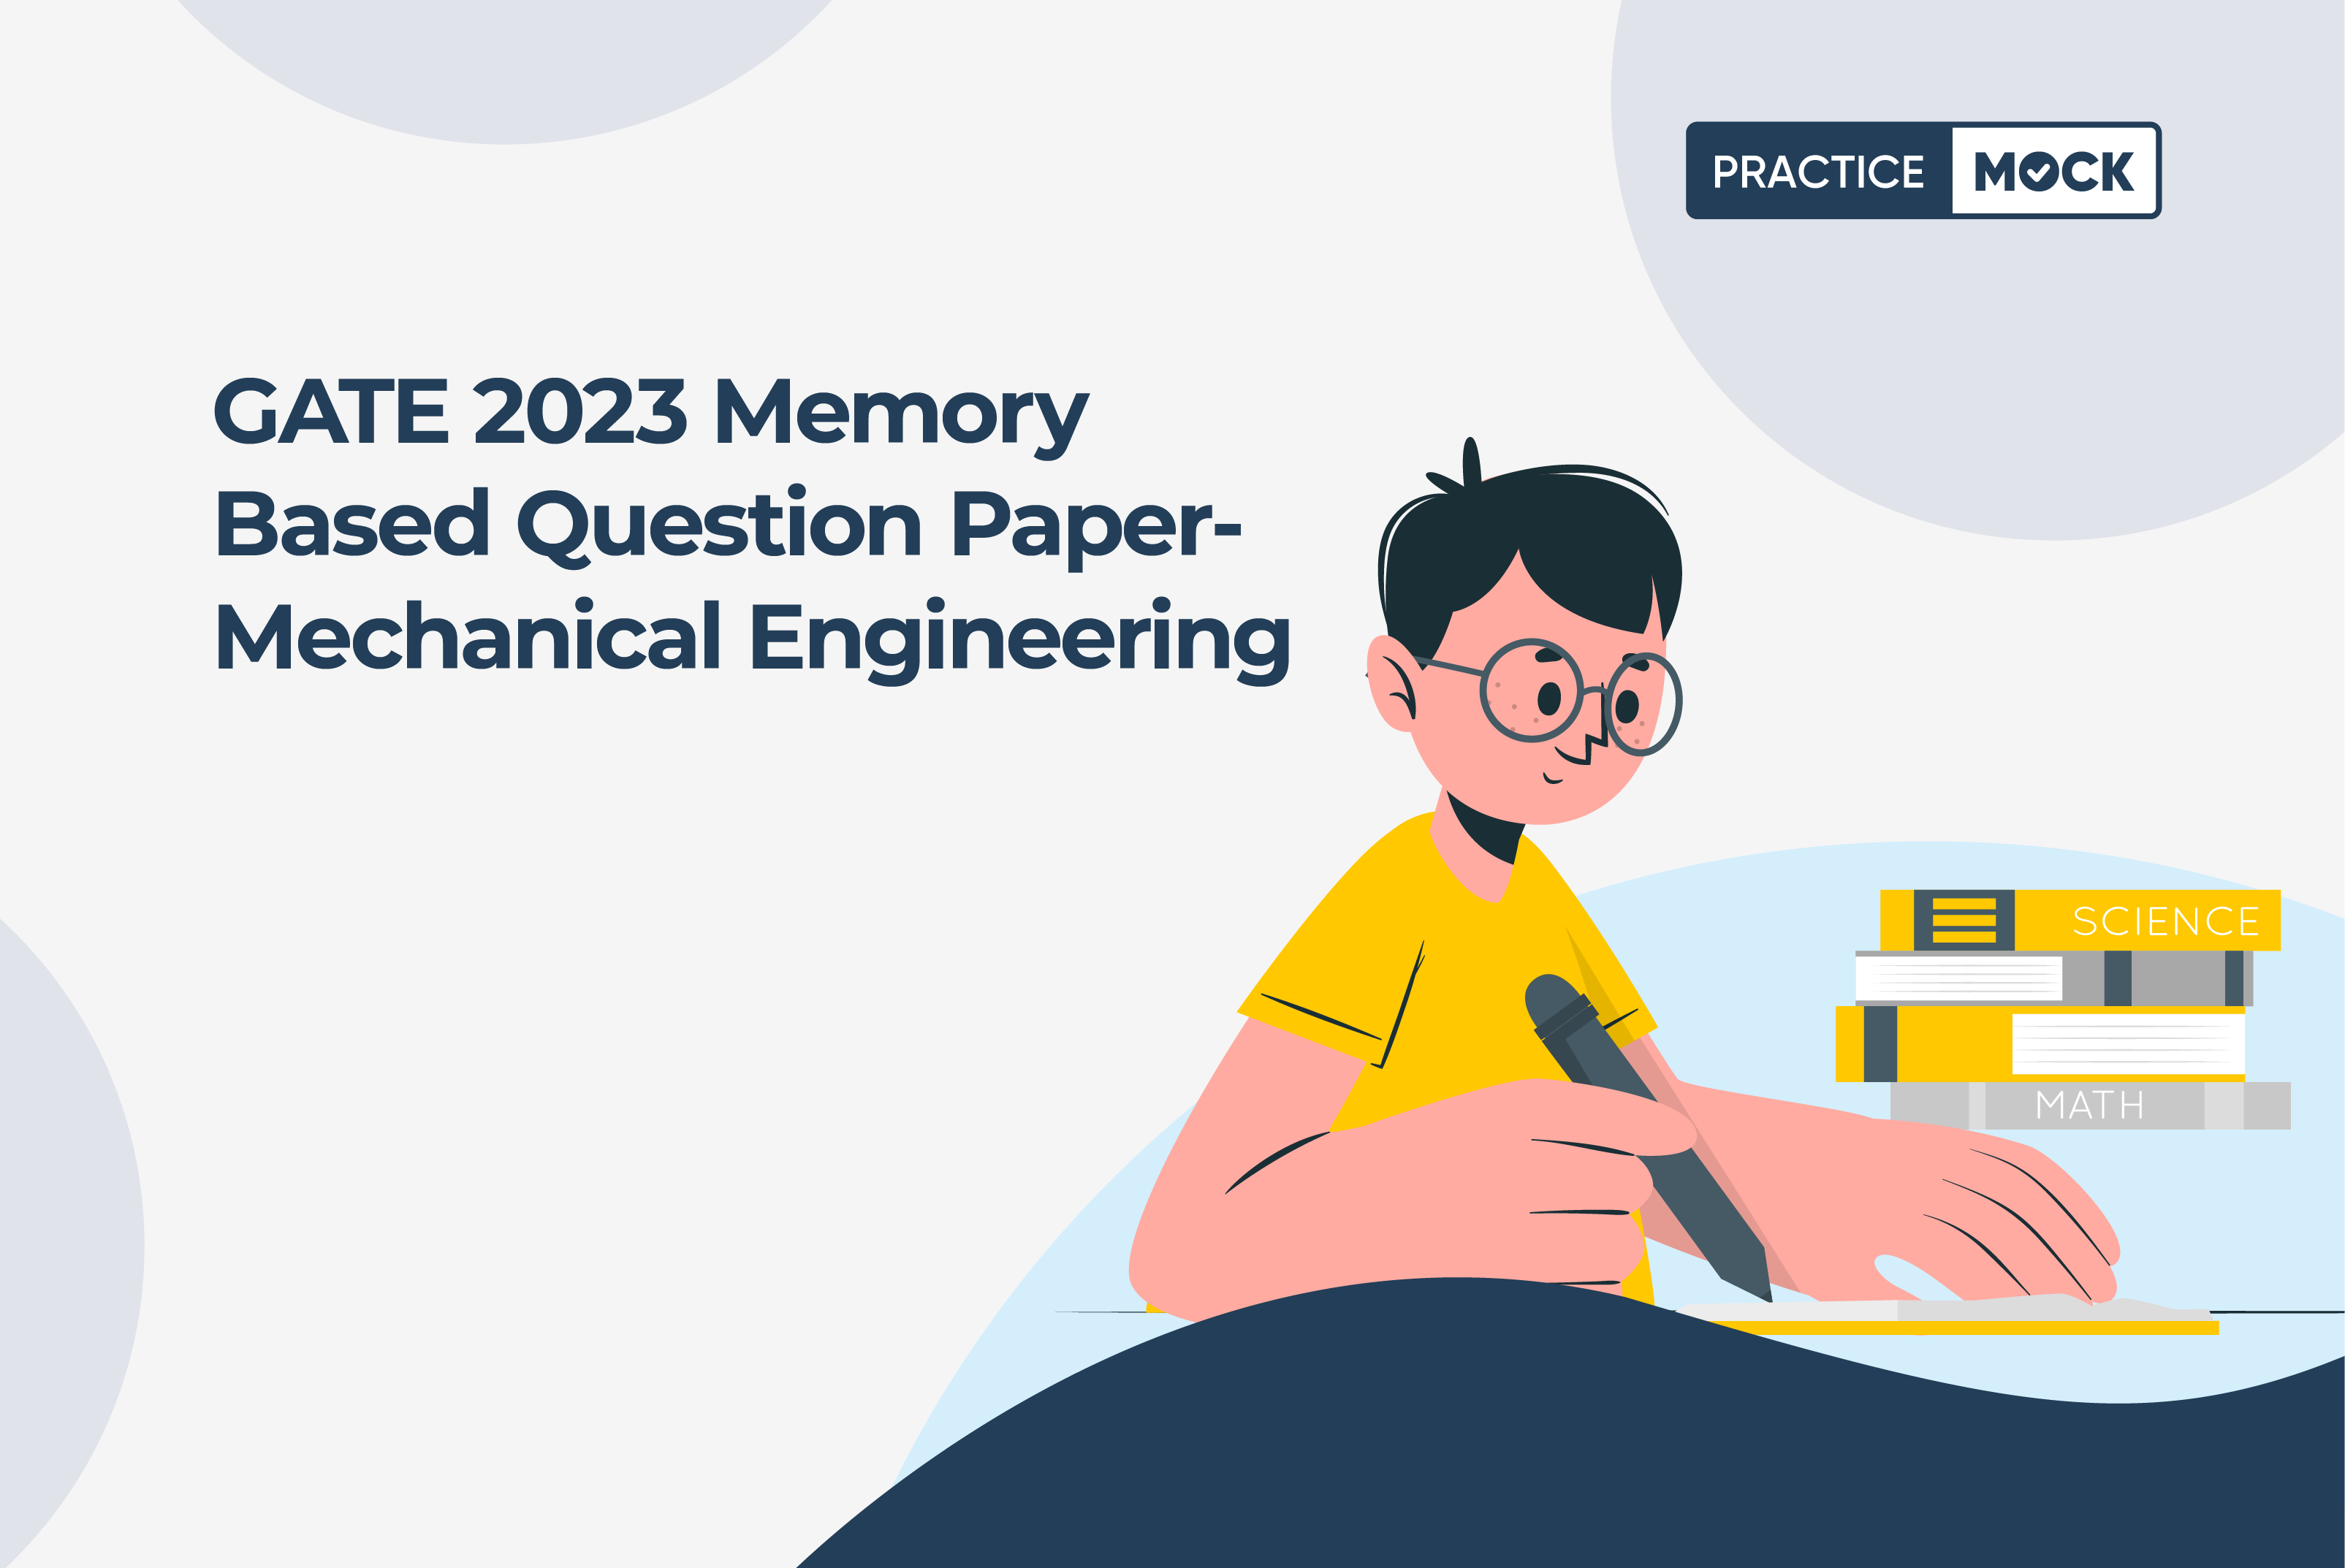 GATE 2023 Memory Based Question Paper- Mechanical Engineering